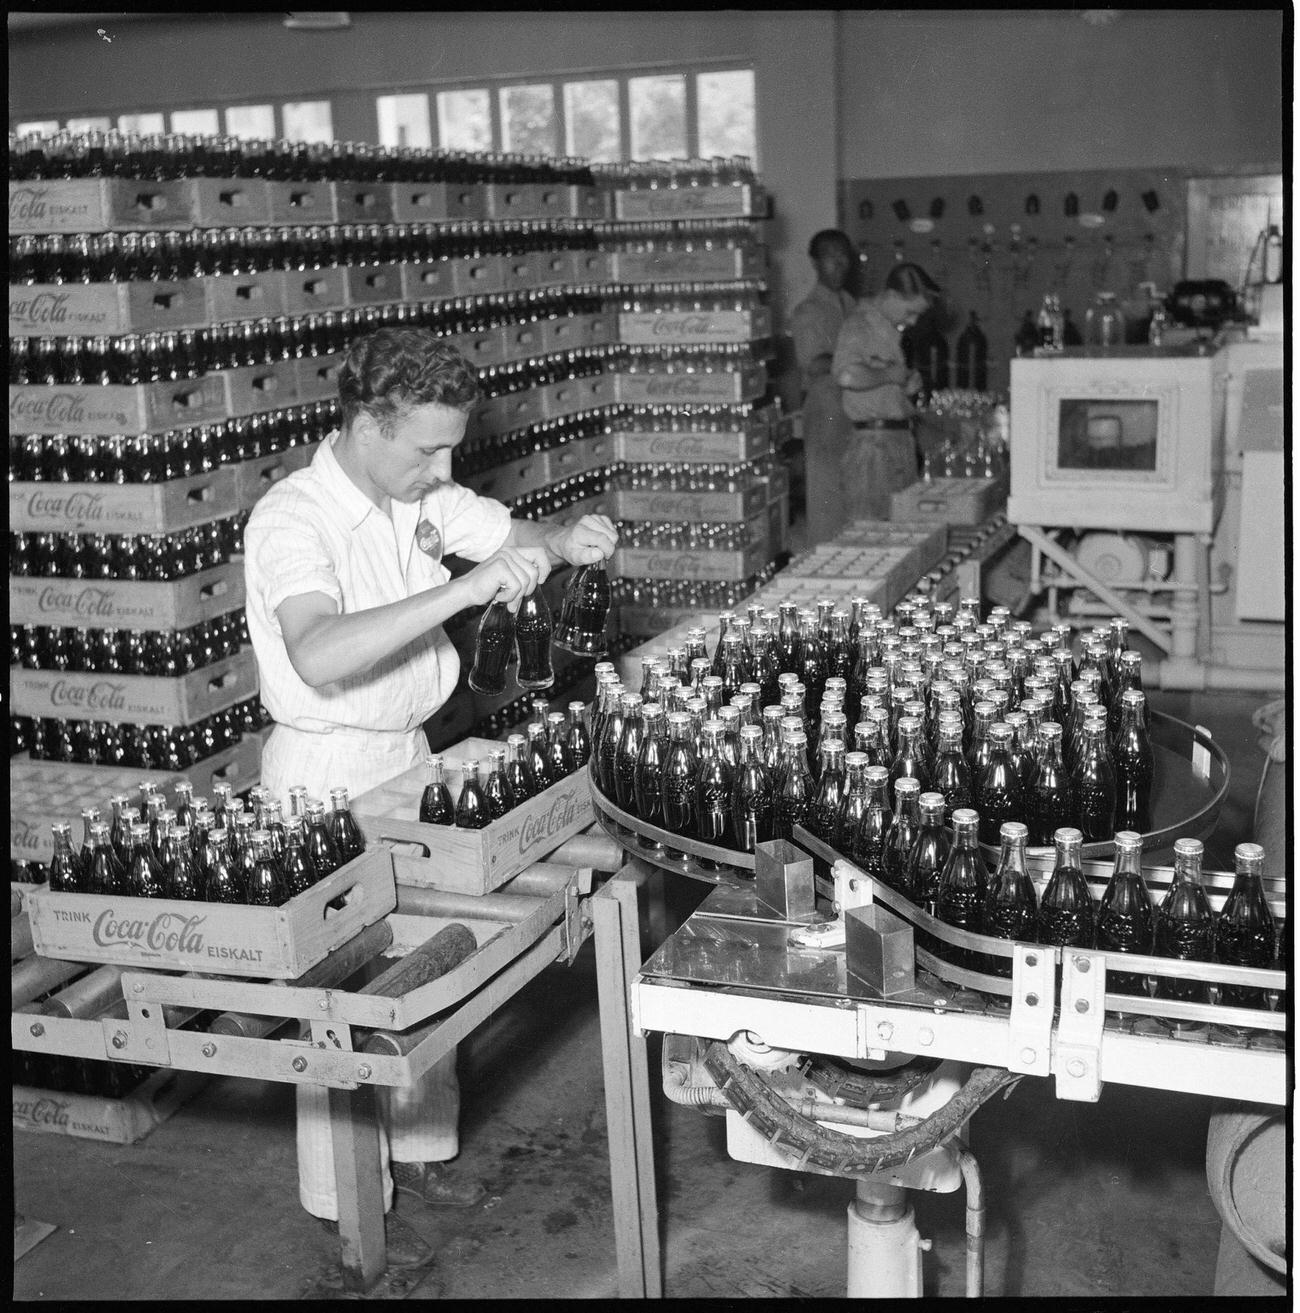 Coca-Cola worker at a bottling plant in Zurich, 1950.